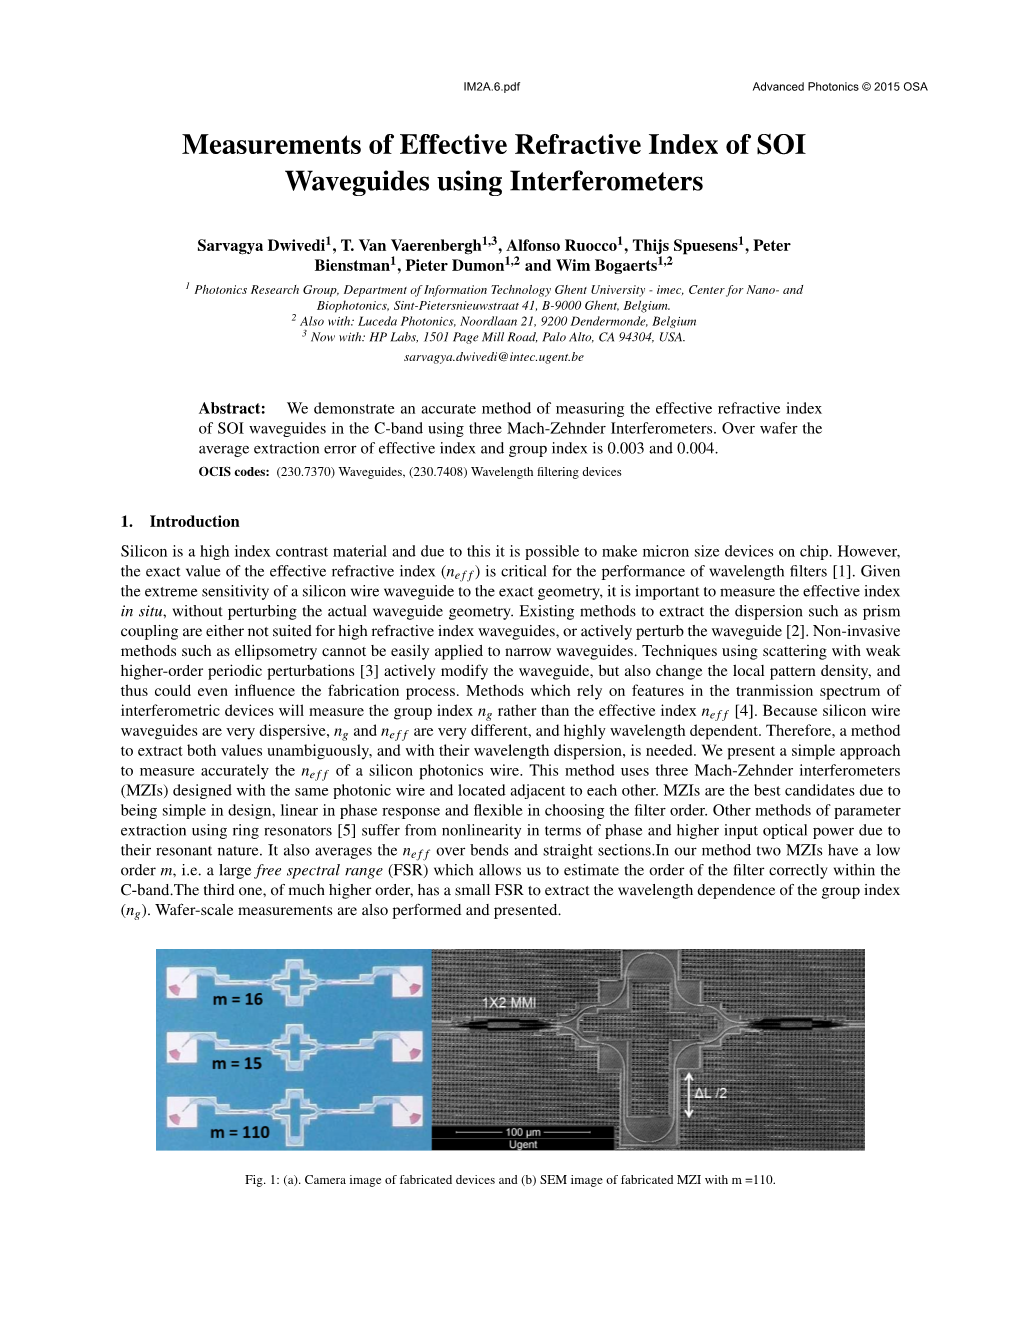 Measurements of Effective Refractive Index of SOI Waveguides Using Interferometers